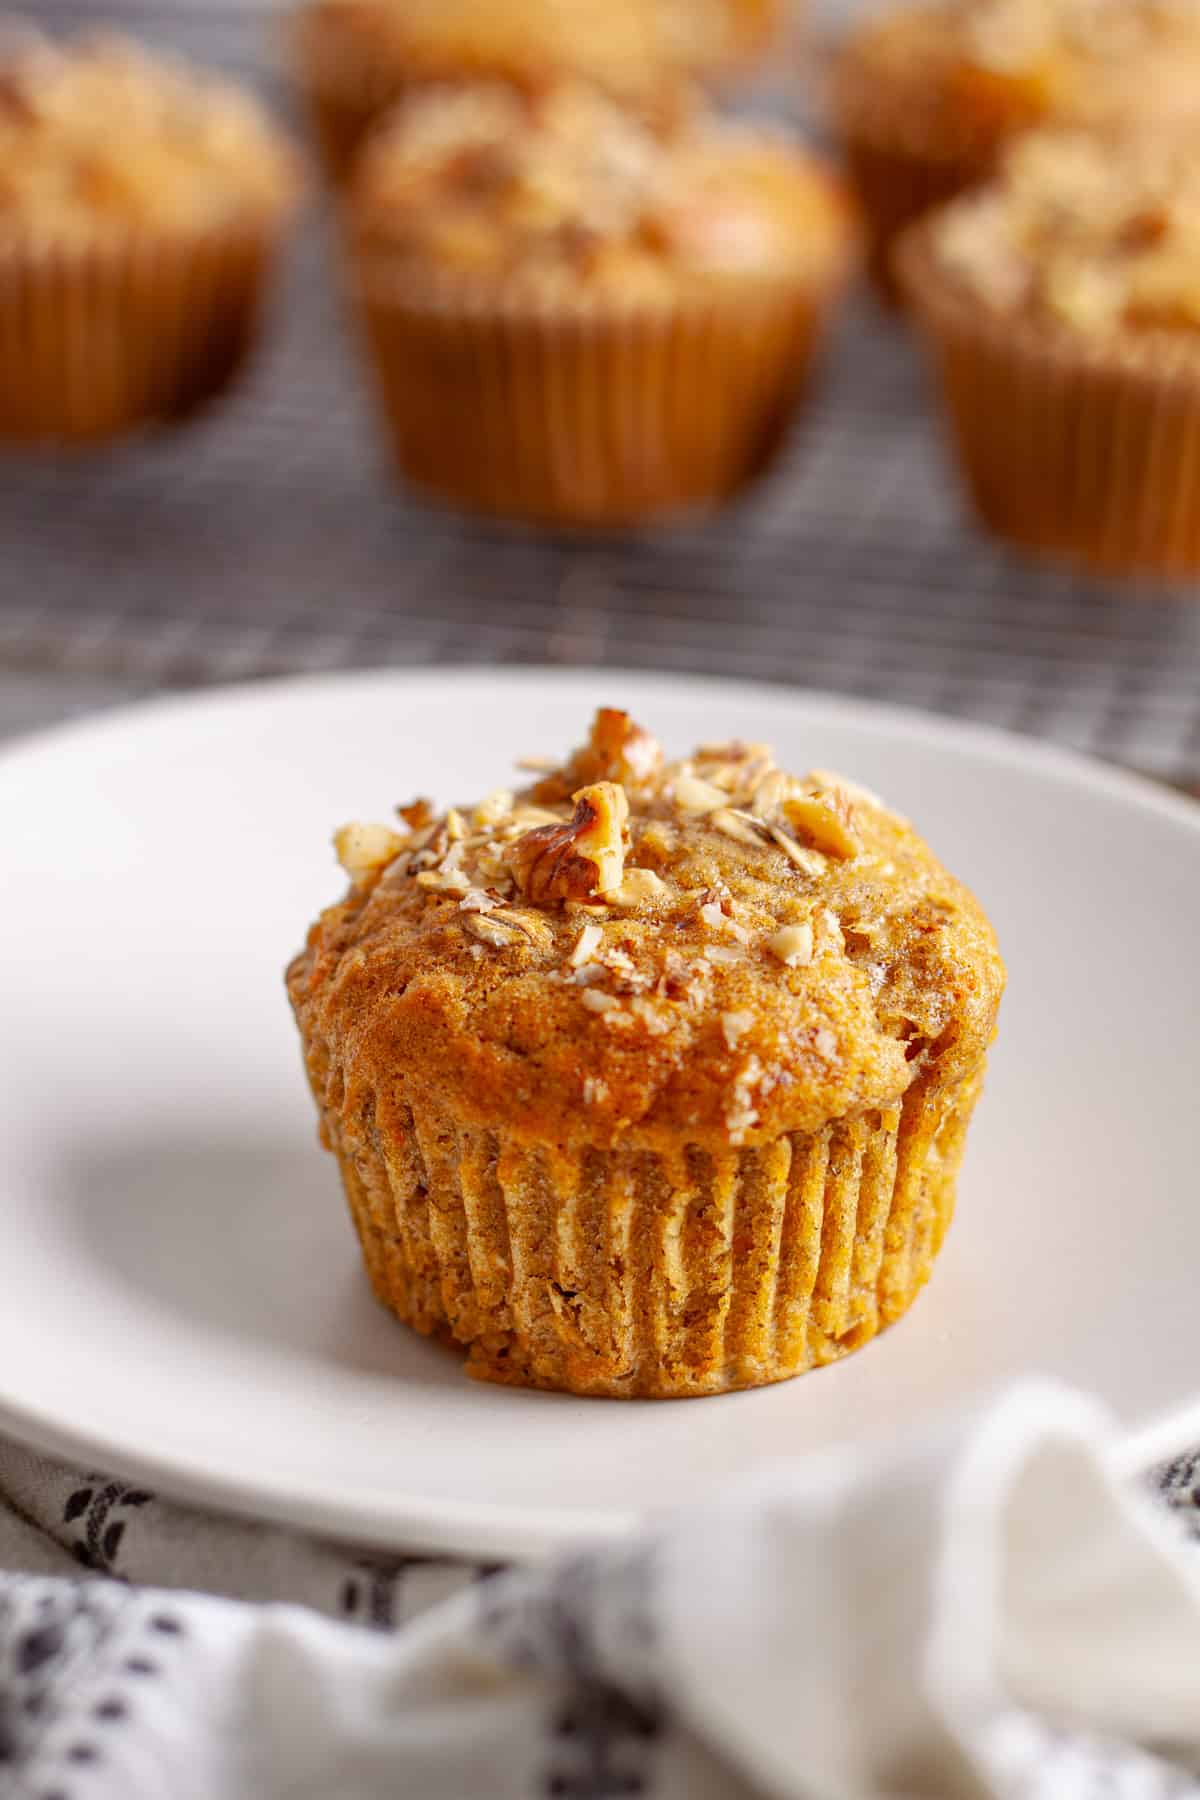 A freshly baked carrot banana muffin on a small plate with the muffin tin in the background.